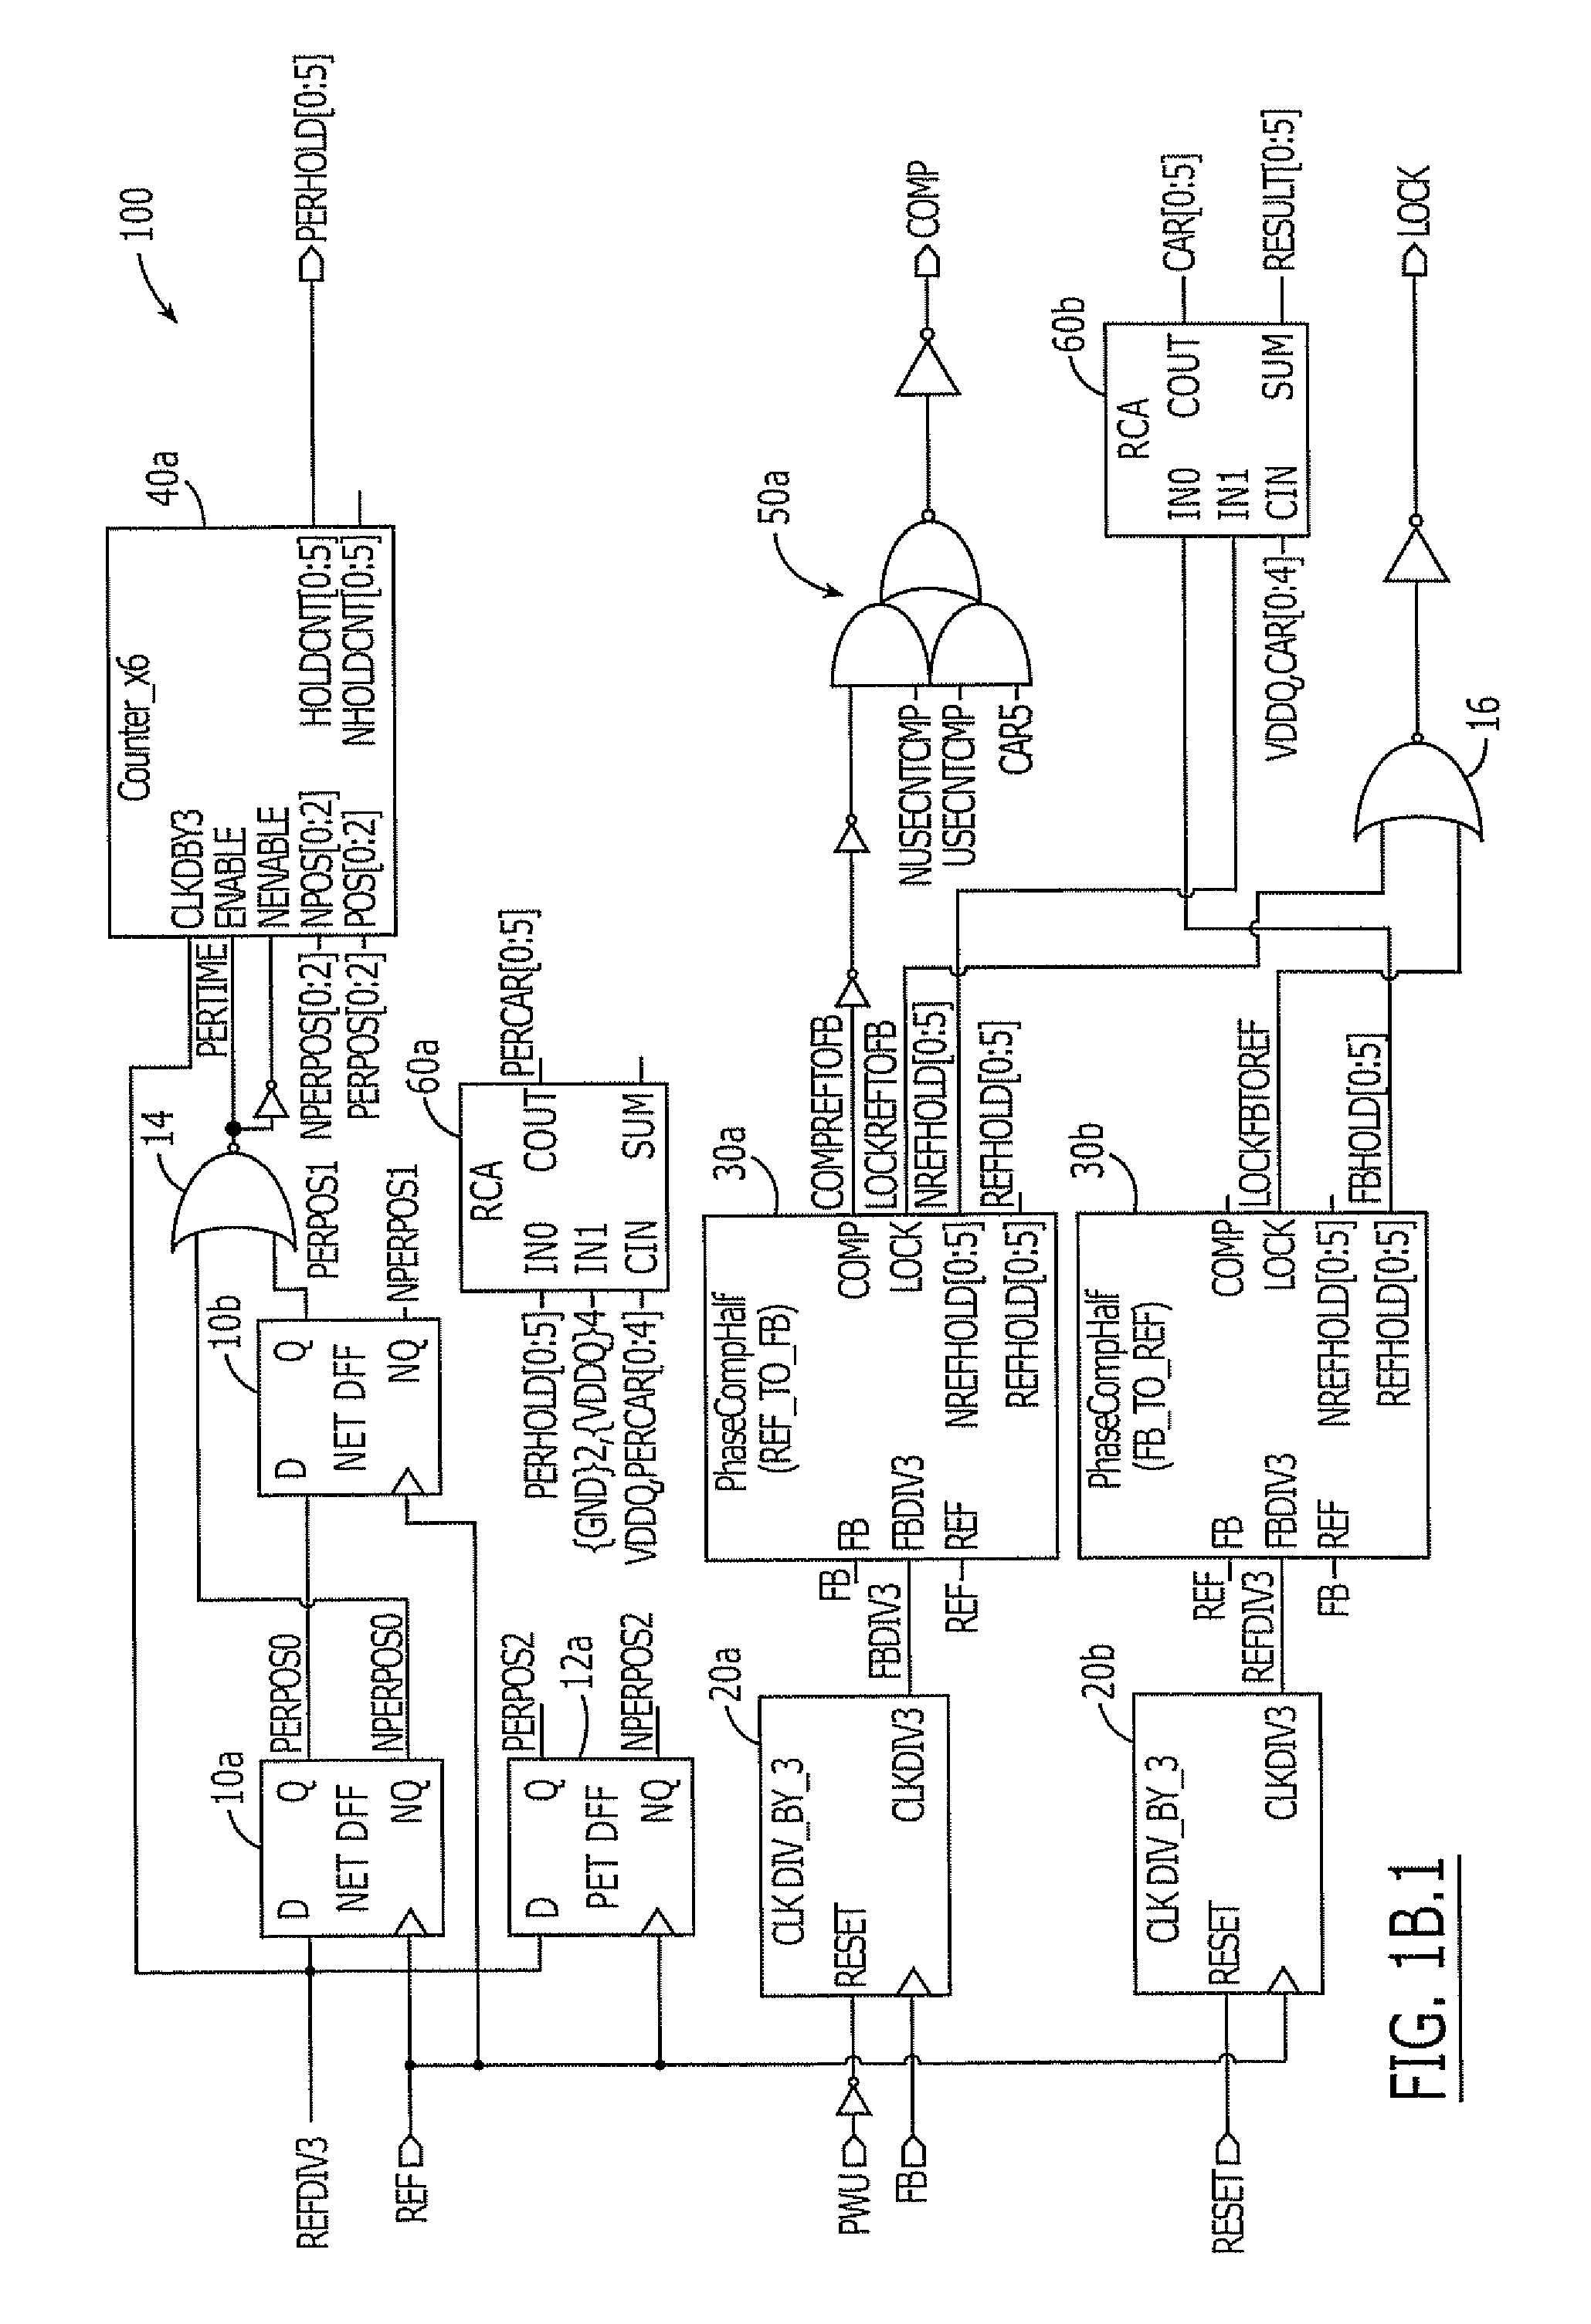 Delay chain integrated circuits having binary-weighted delay chain units with built-in phase comparators therein